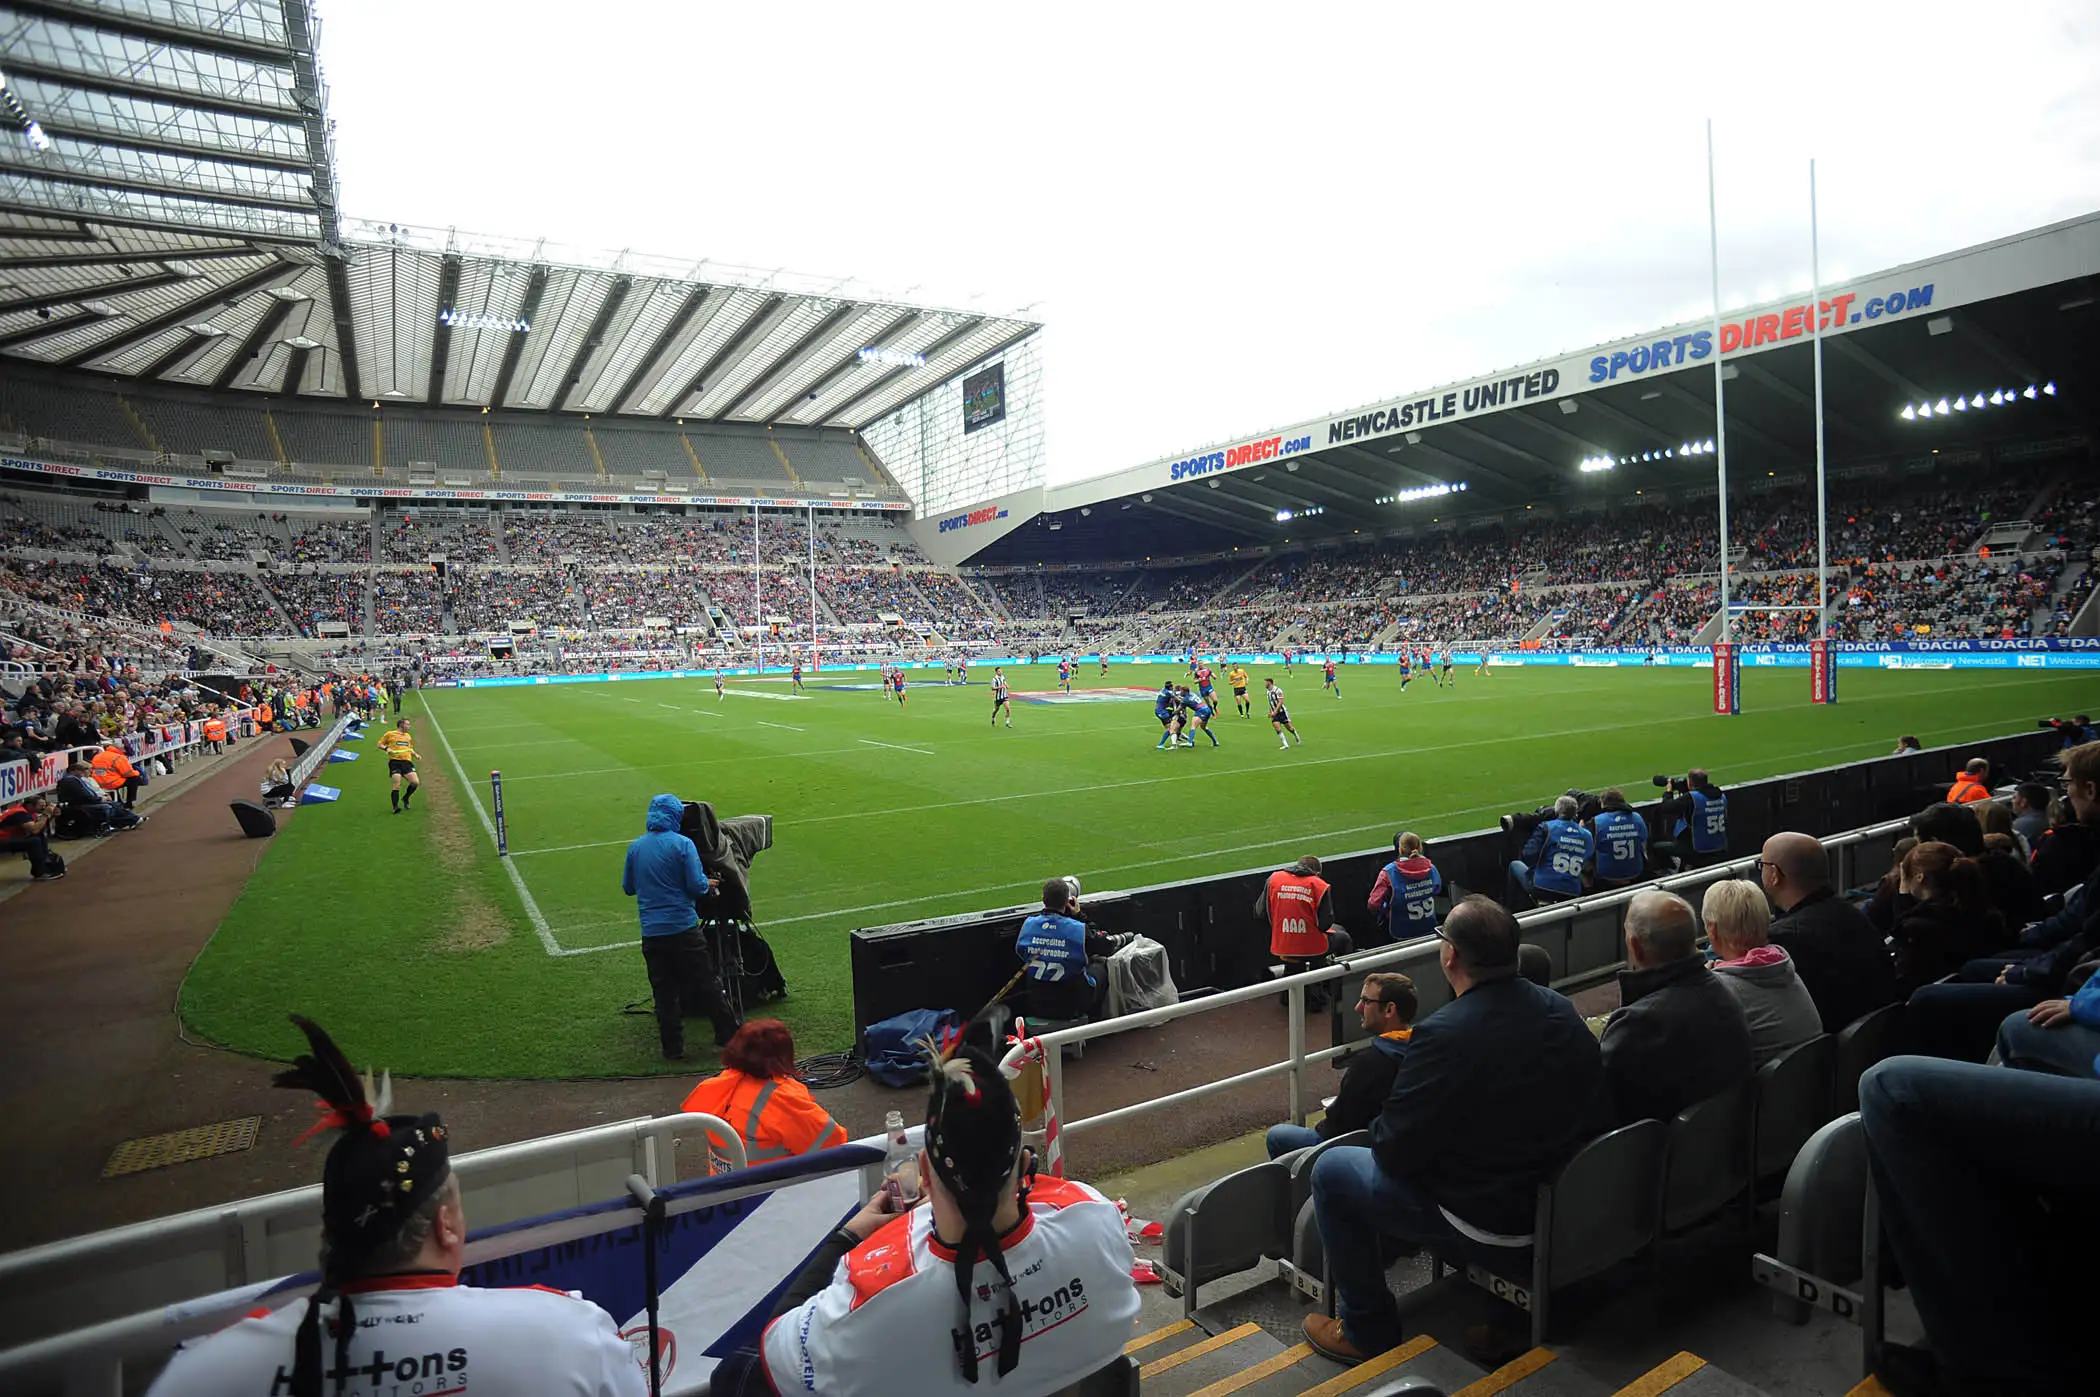 Mailbox: Take Magic Weekend to new territories and prove there’s more than one rugby